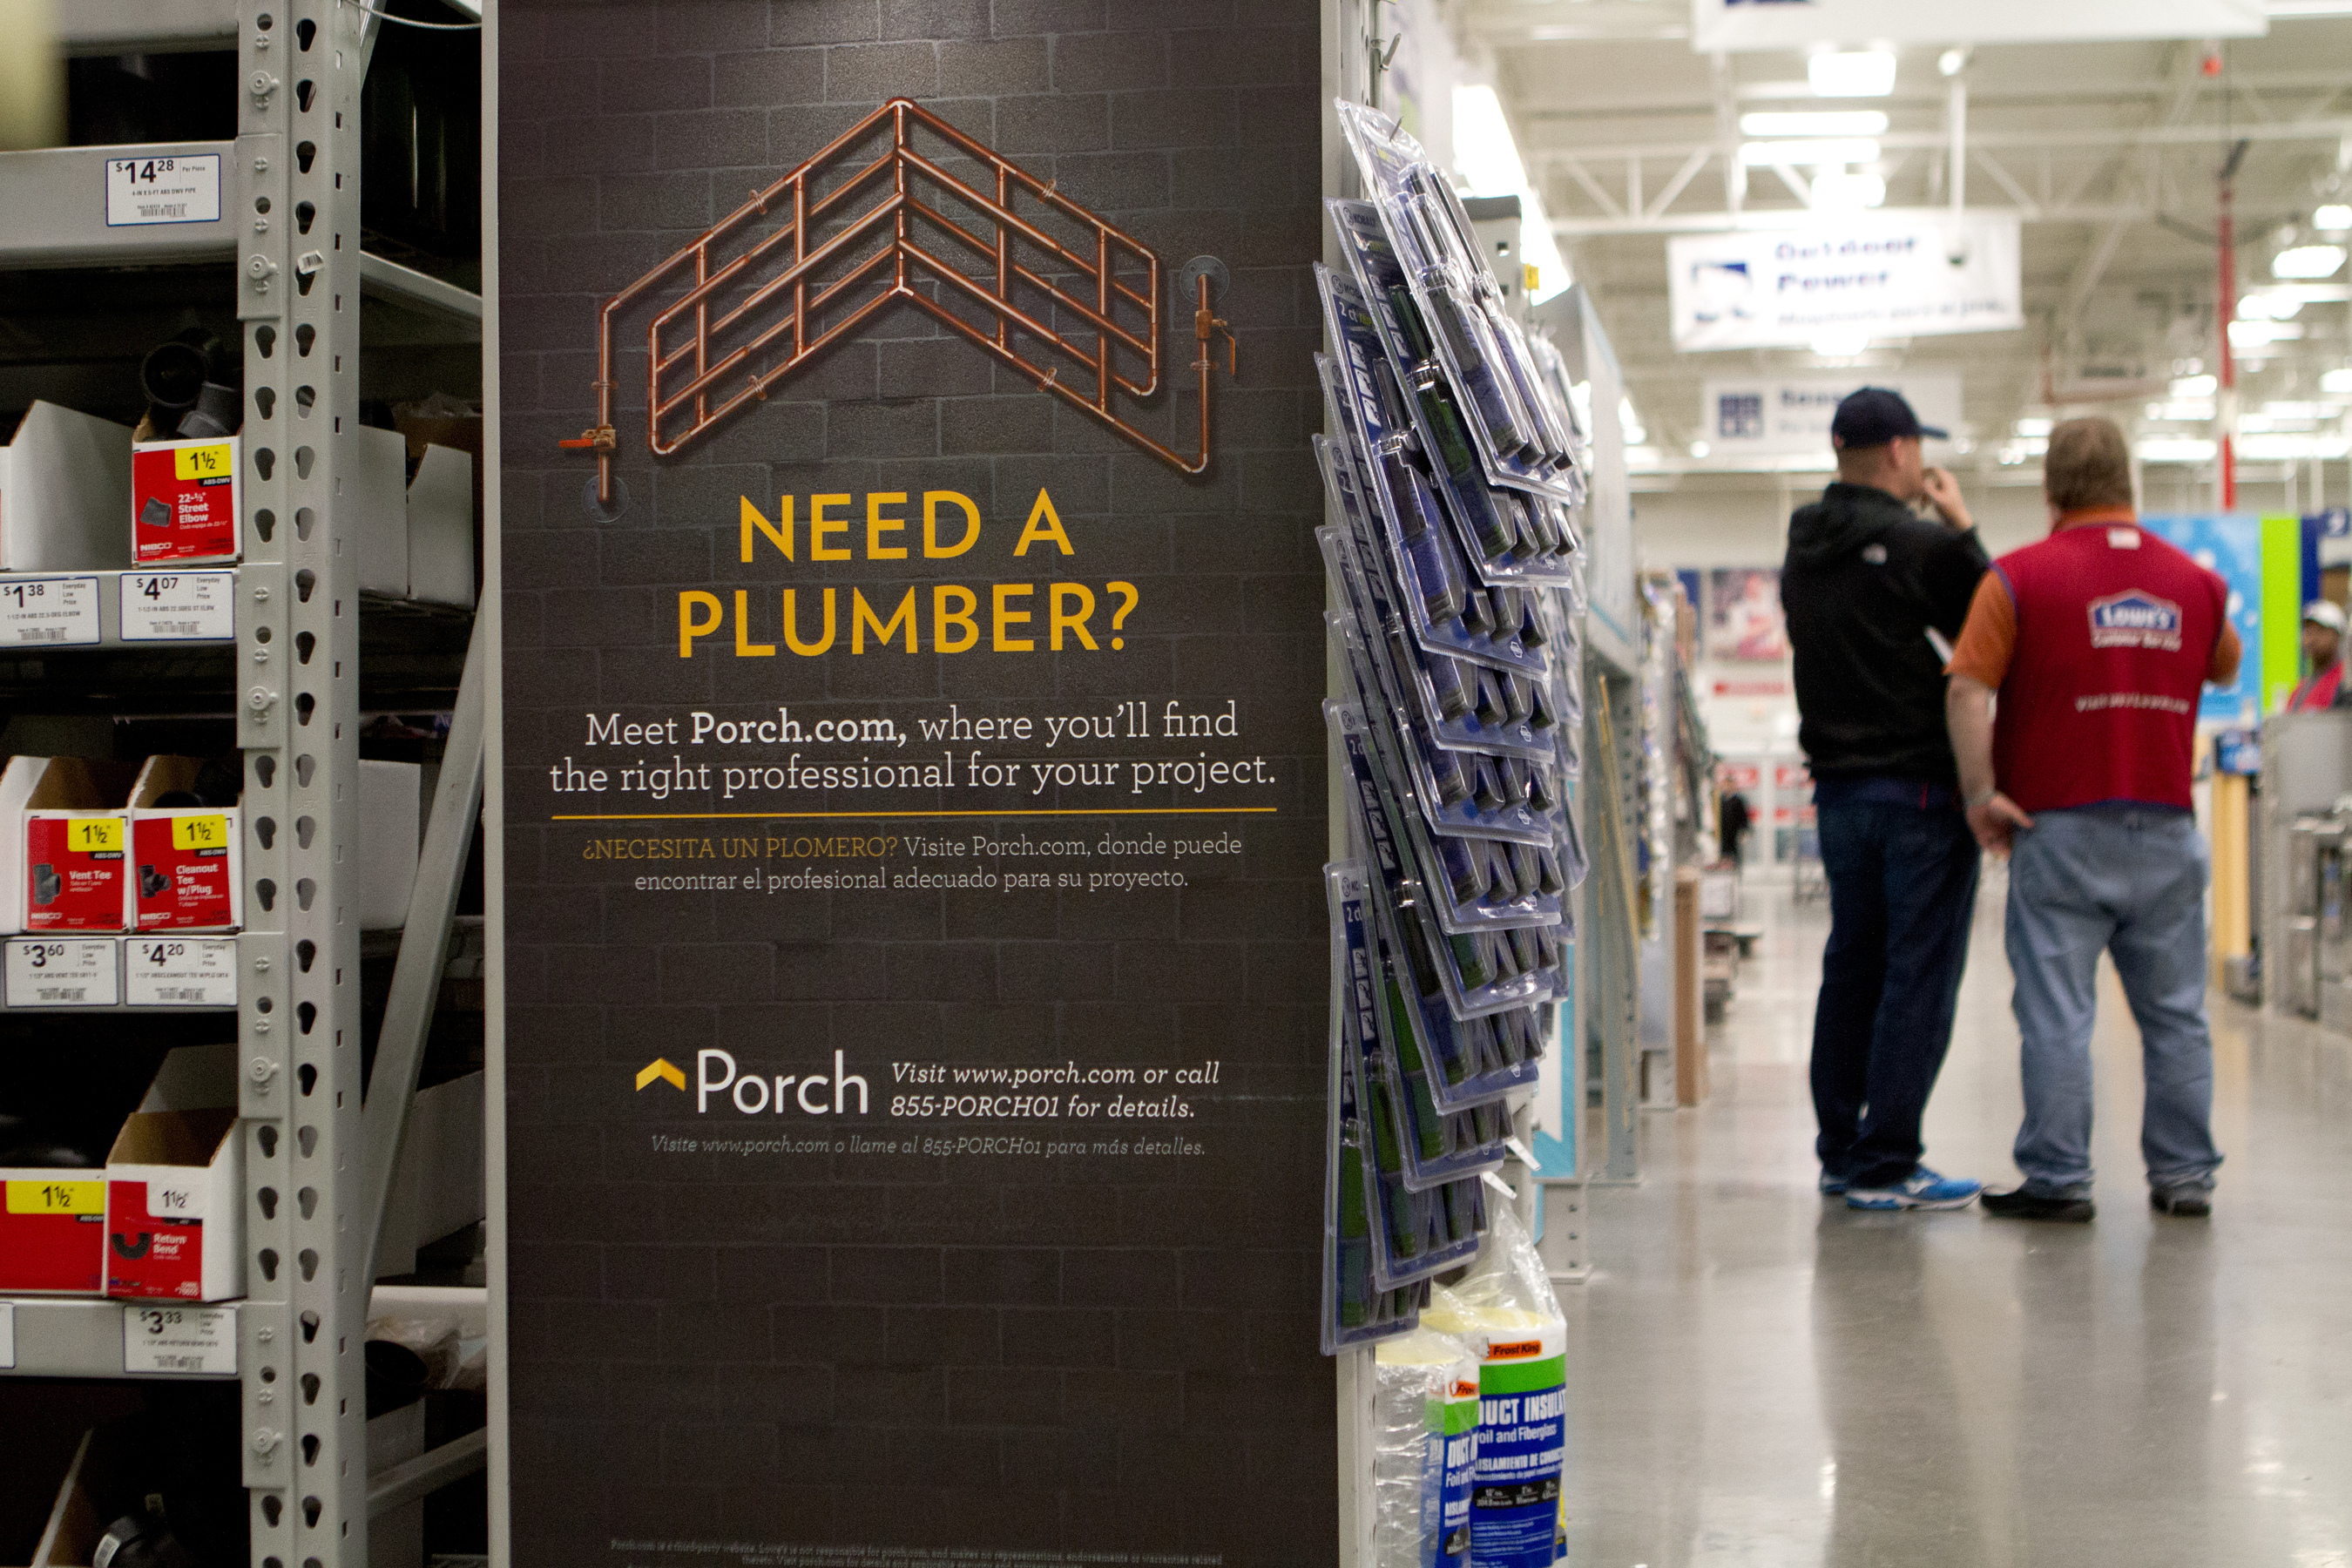 The partnership with Porch is the latest in a series of technology initiatives Lowe's has introduced to enhance the in-store support employees can offer customers. (PRNewsFoto/Lowe's Companies, Inc.)